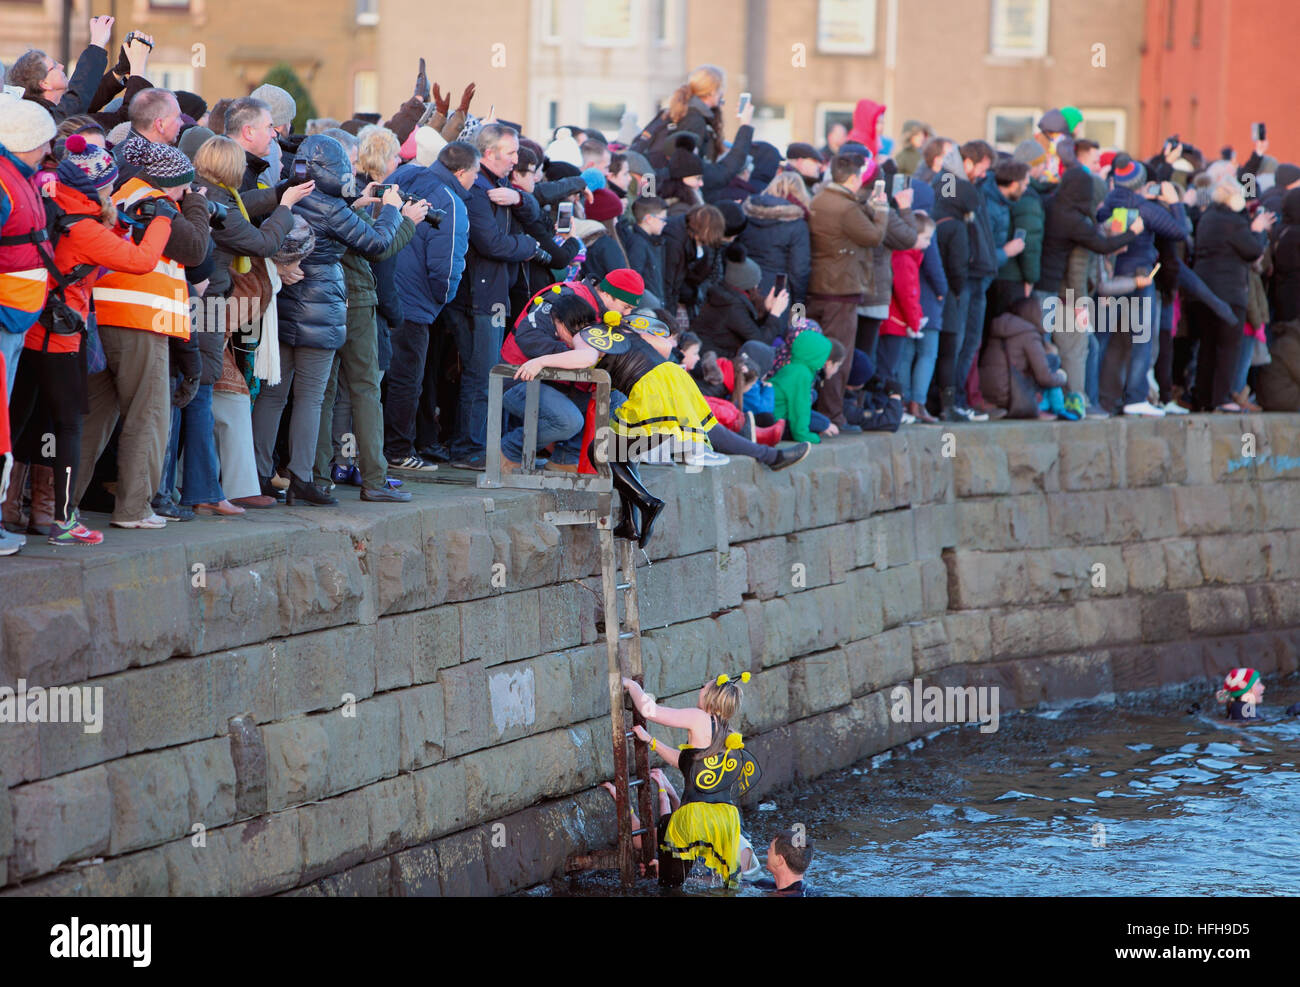 New Years Day 'Dook' Broughty Ferry, Dundee, UK. 1st Jan, 2017. swimmers in fancy dress prepare to jump into freezing waters of The River Tay © Derek Allan/Alamy Live News Stock Photo